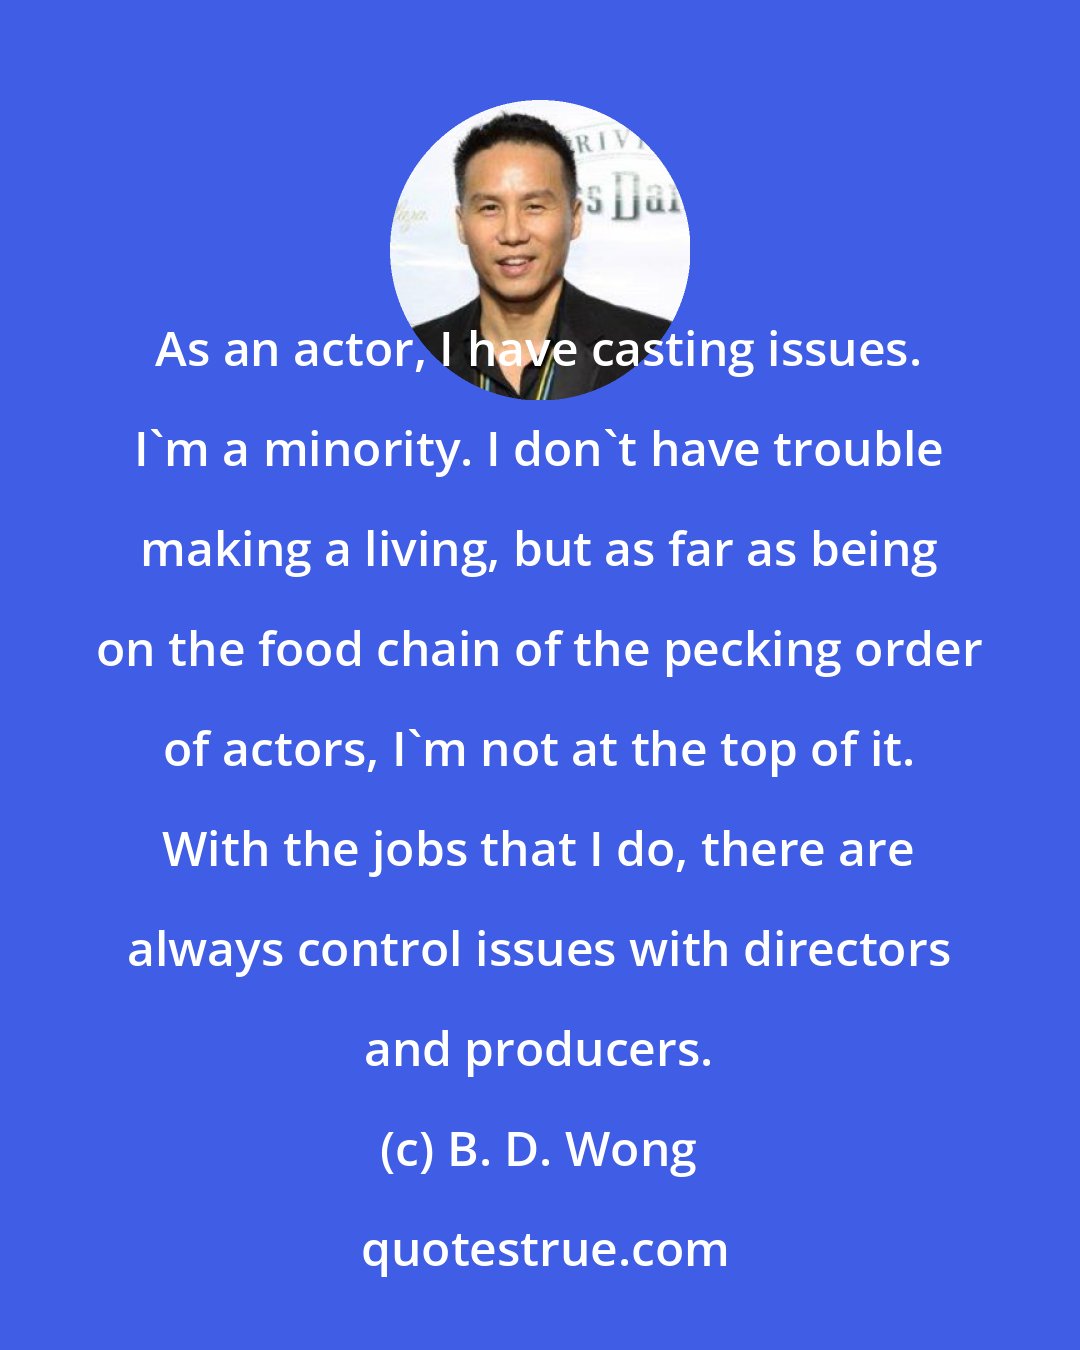 B. D. Wong: As an actor, I have casting issues. I'm a minority. I don't have trouble making a living, but as far as being on the food chain of the pecking order of actors, I'm not at the top of it. With the jobs that I do, there are always control issues with directors and producers.